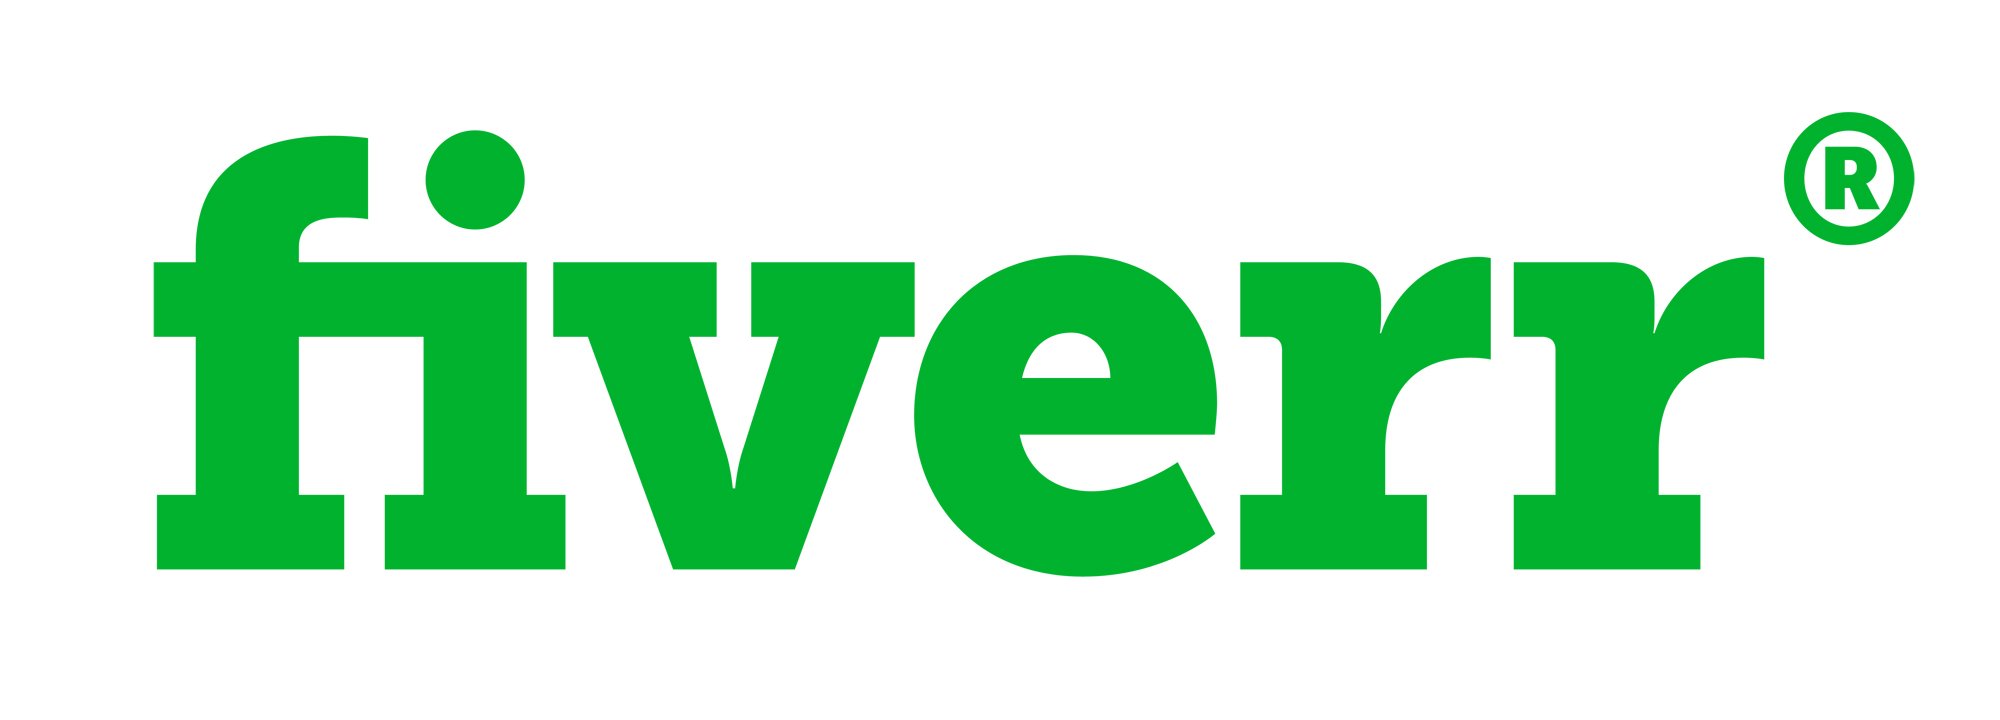 Fiverr logo and symbol, meaning, history, PNG